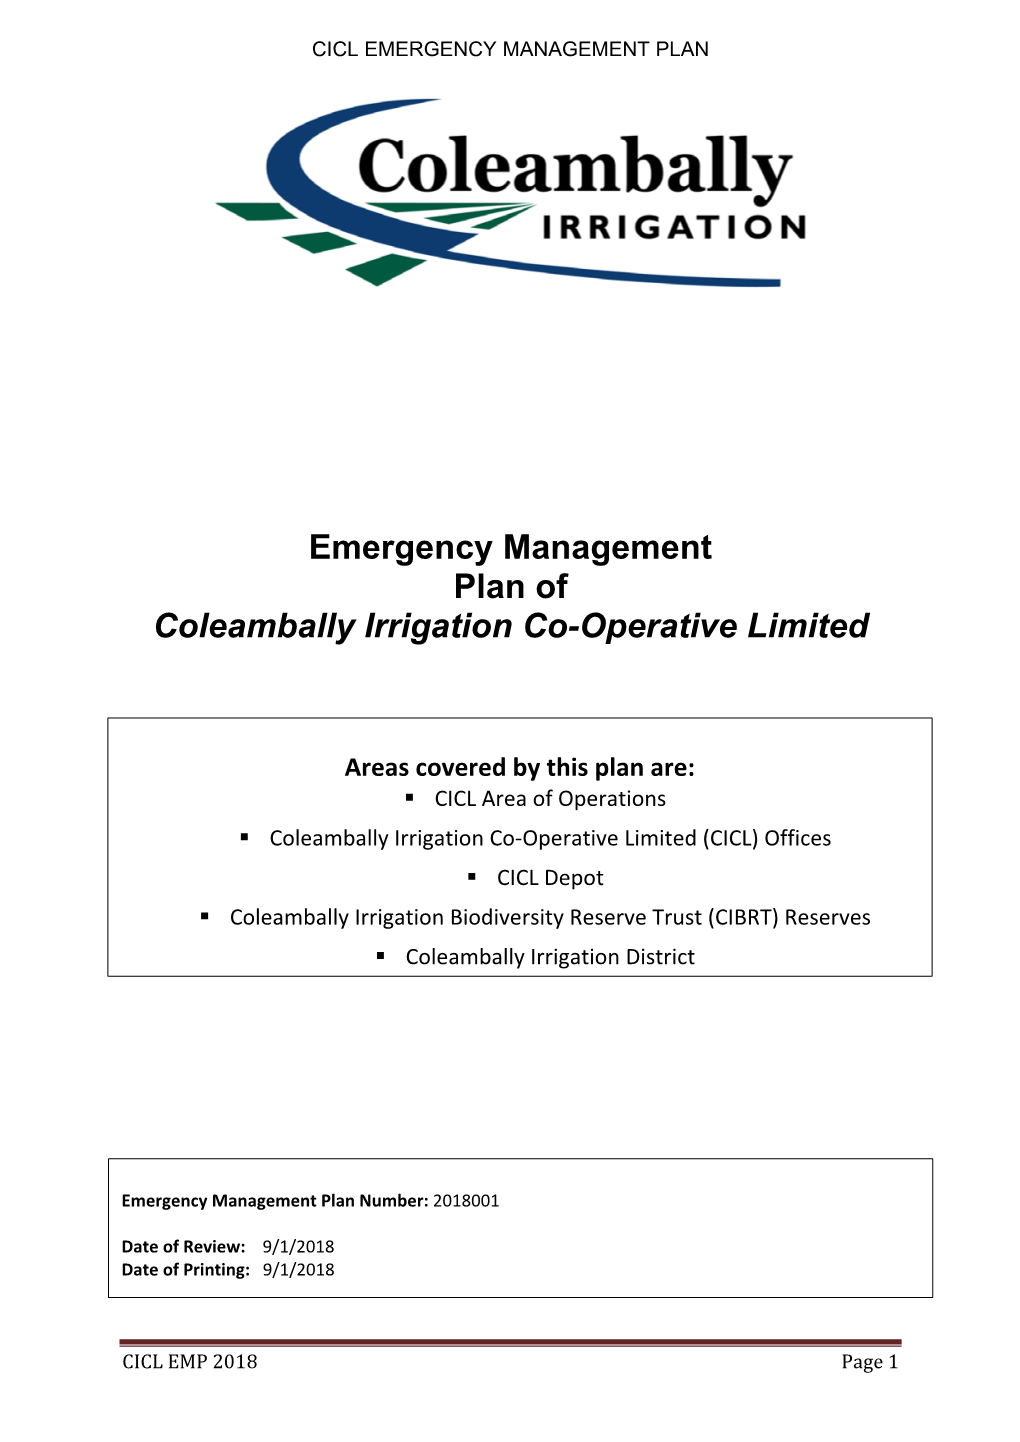 Emergency Management Plan of Coleambally Irrigation Co-Operative Limited